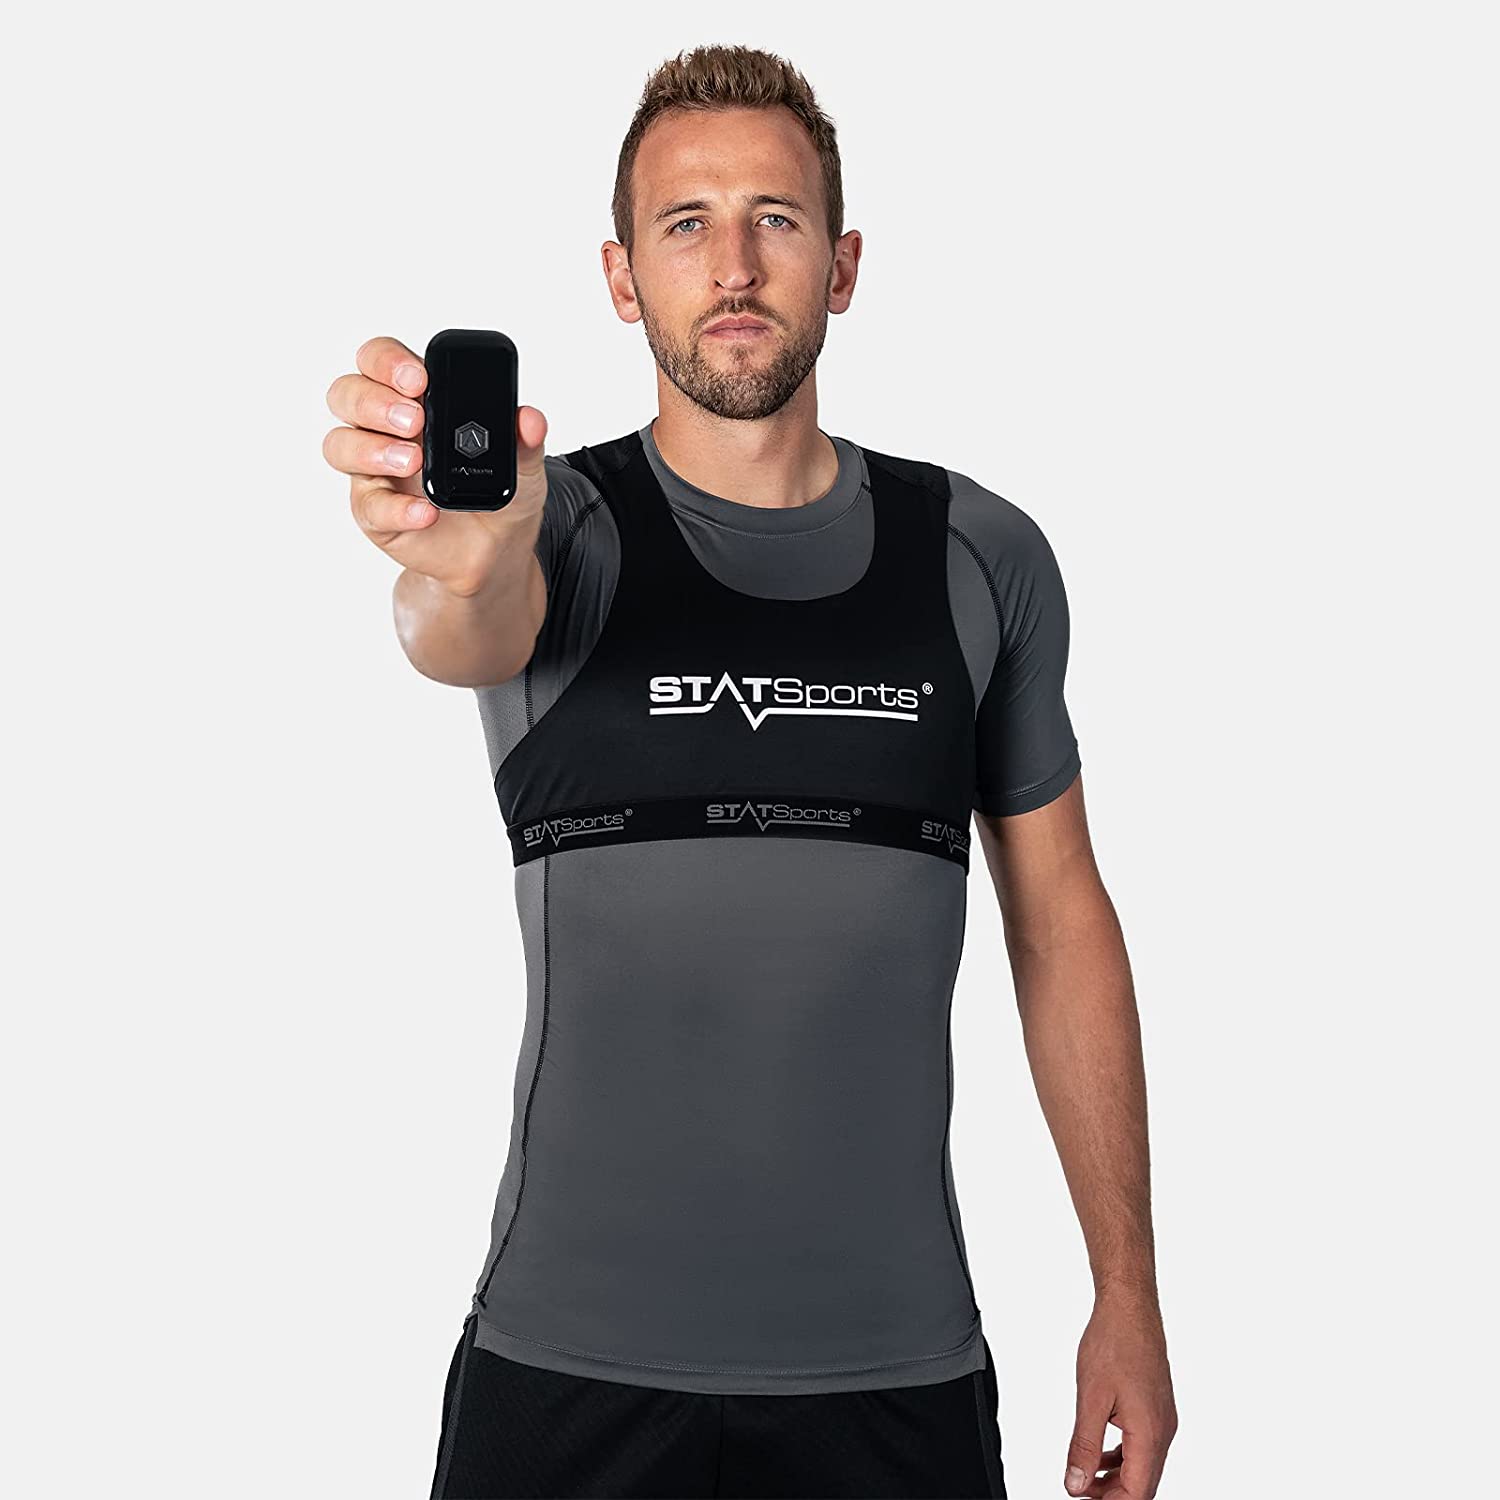 GPSports Vest and the location and orientation of the GPS and